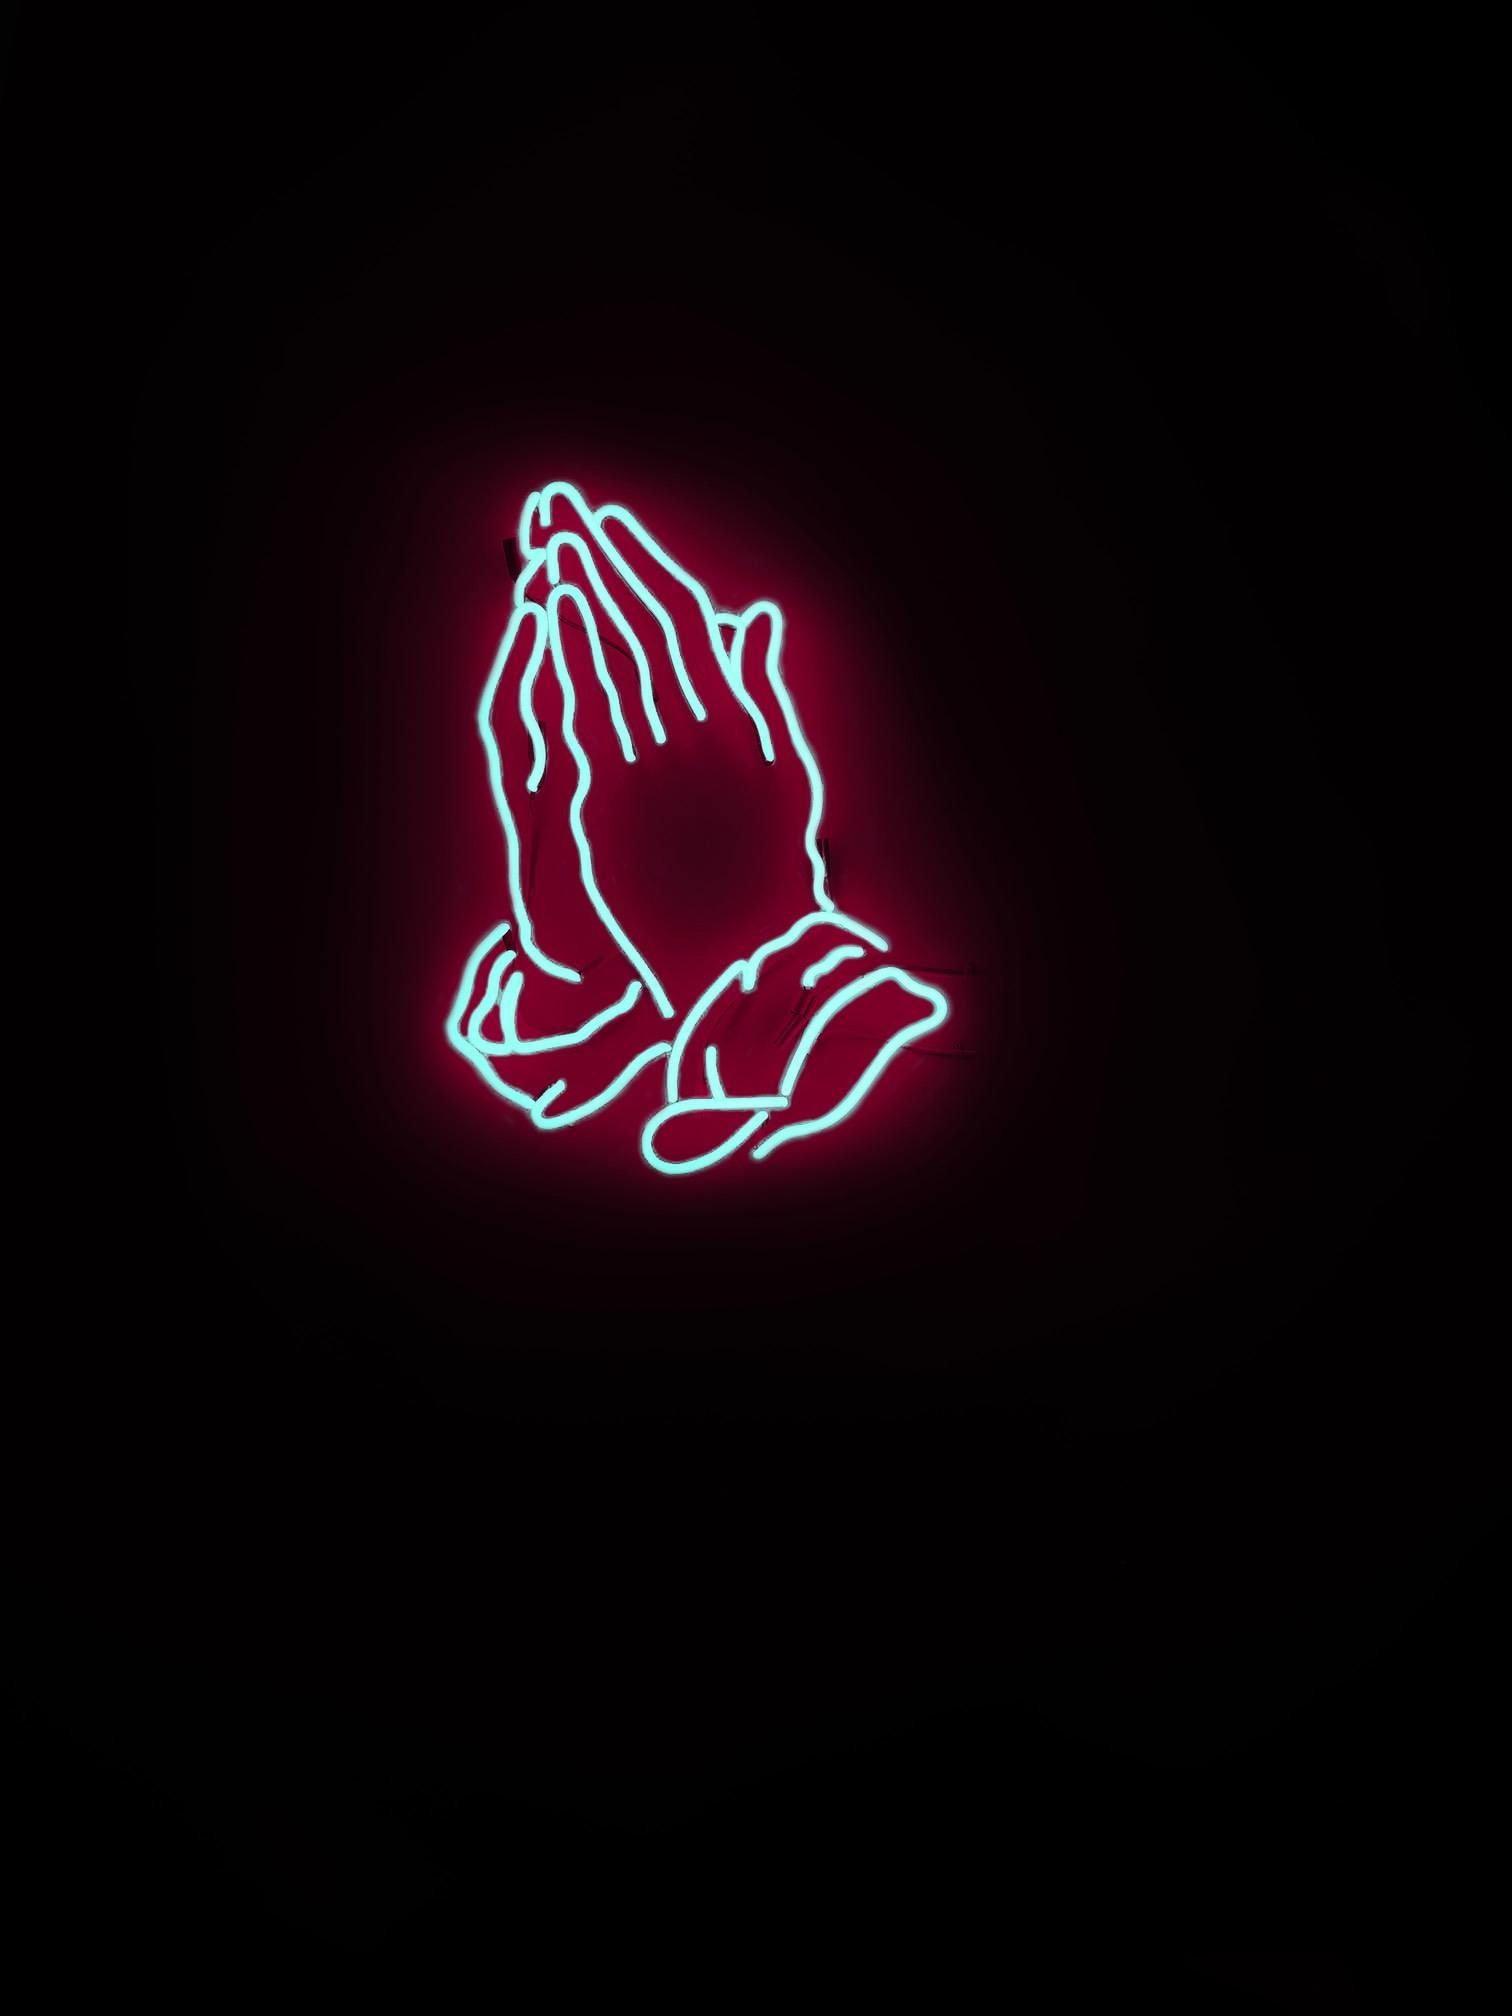 Free Trendy Neon Wallpaper For iPhone (HD Download!). Hand wallpaper, Neon wallpaper, Praying hands